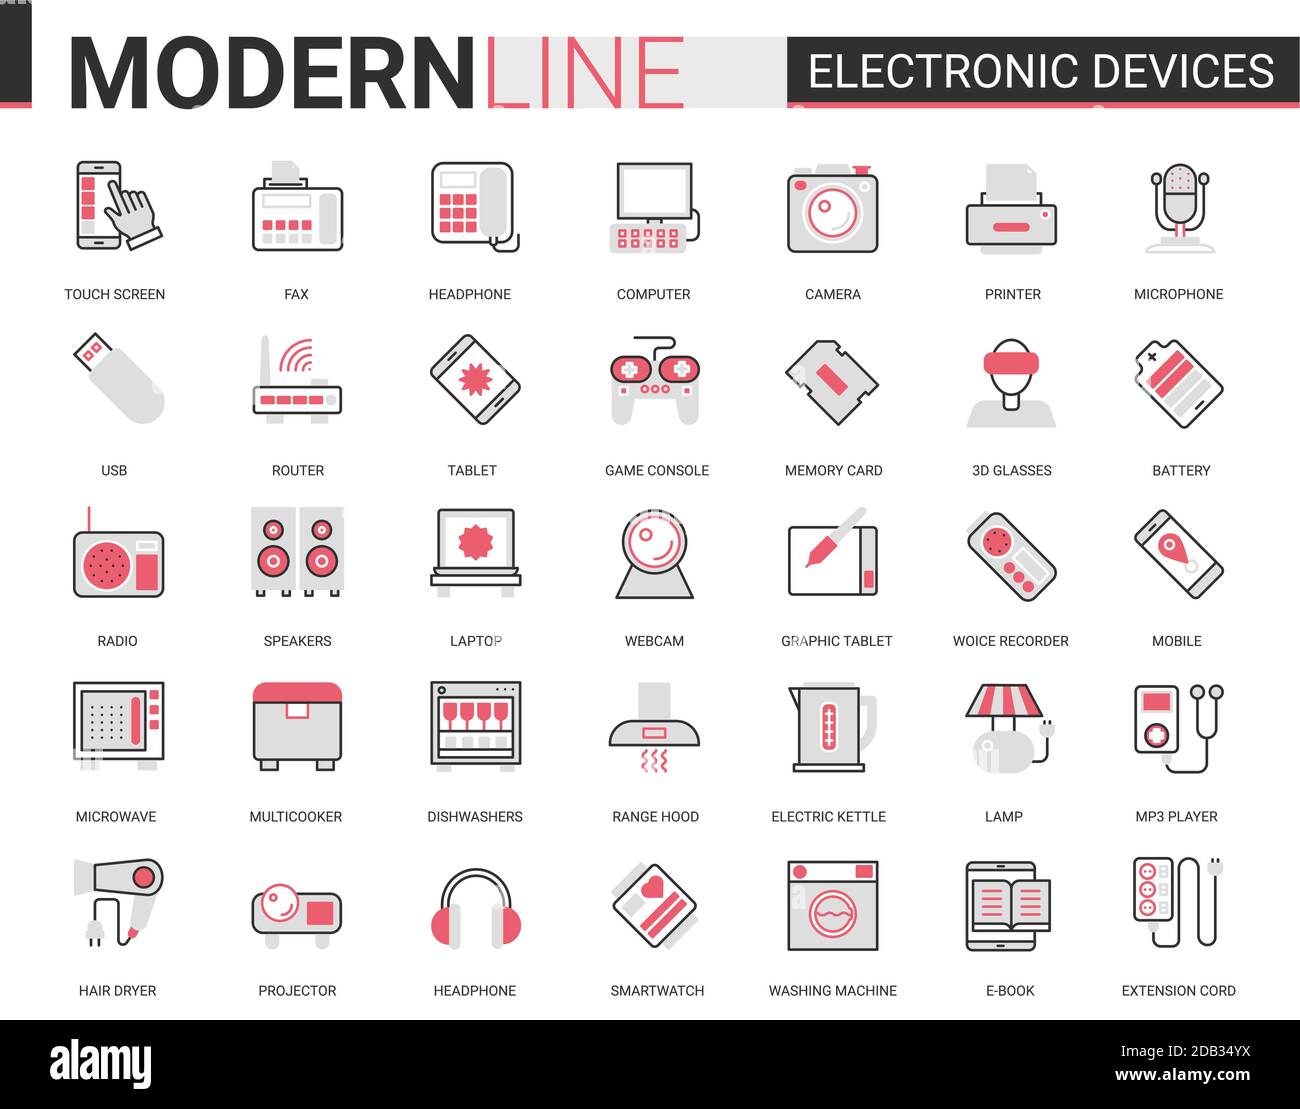 Electronic devices flat line icon vector illustration set. Red black computer game accessories and kitchen appliances collection of outline electronically symbols for gadget or kitchenware store Stock Vector